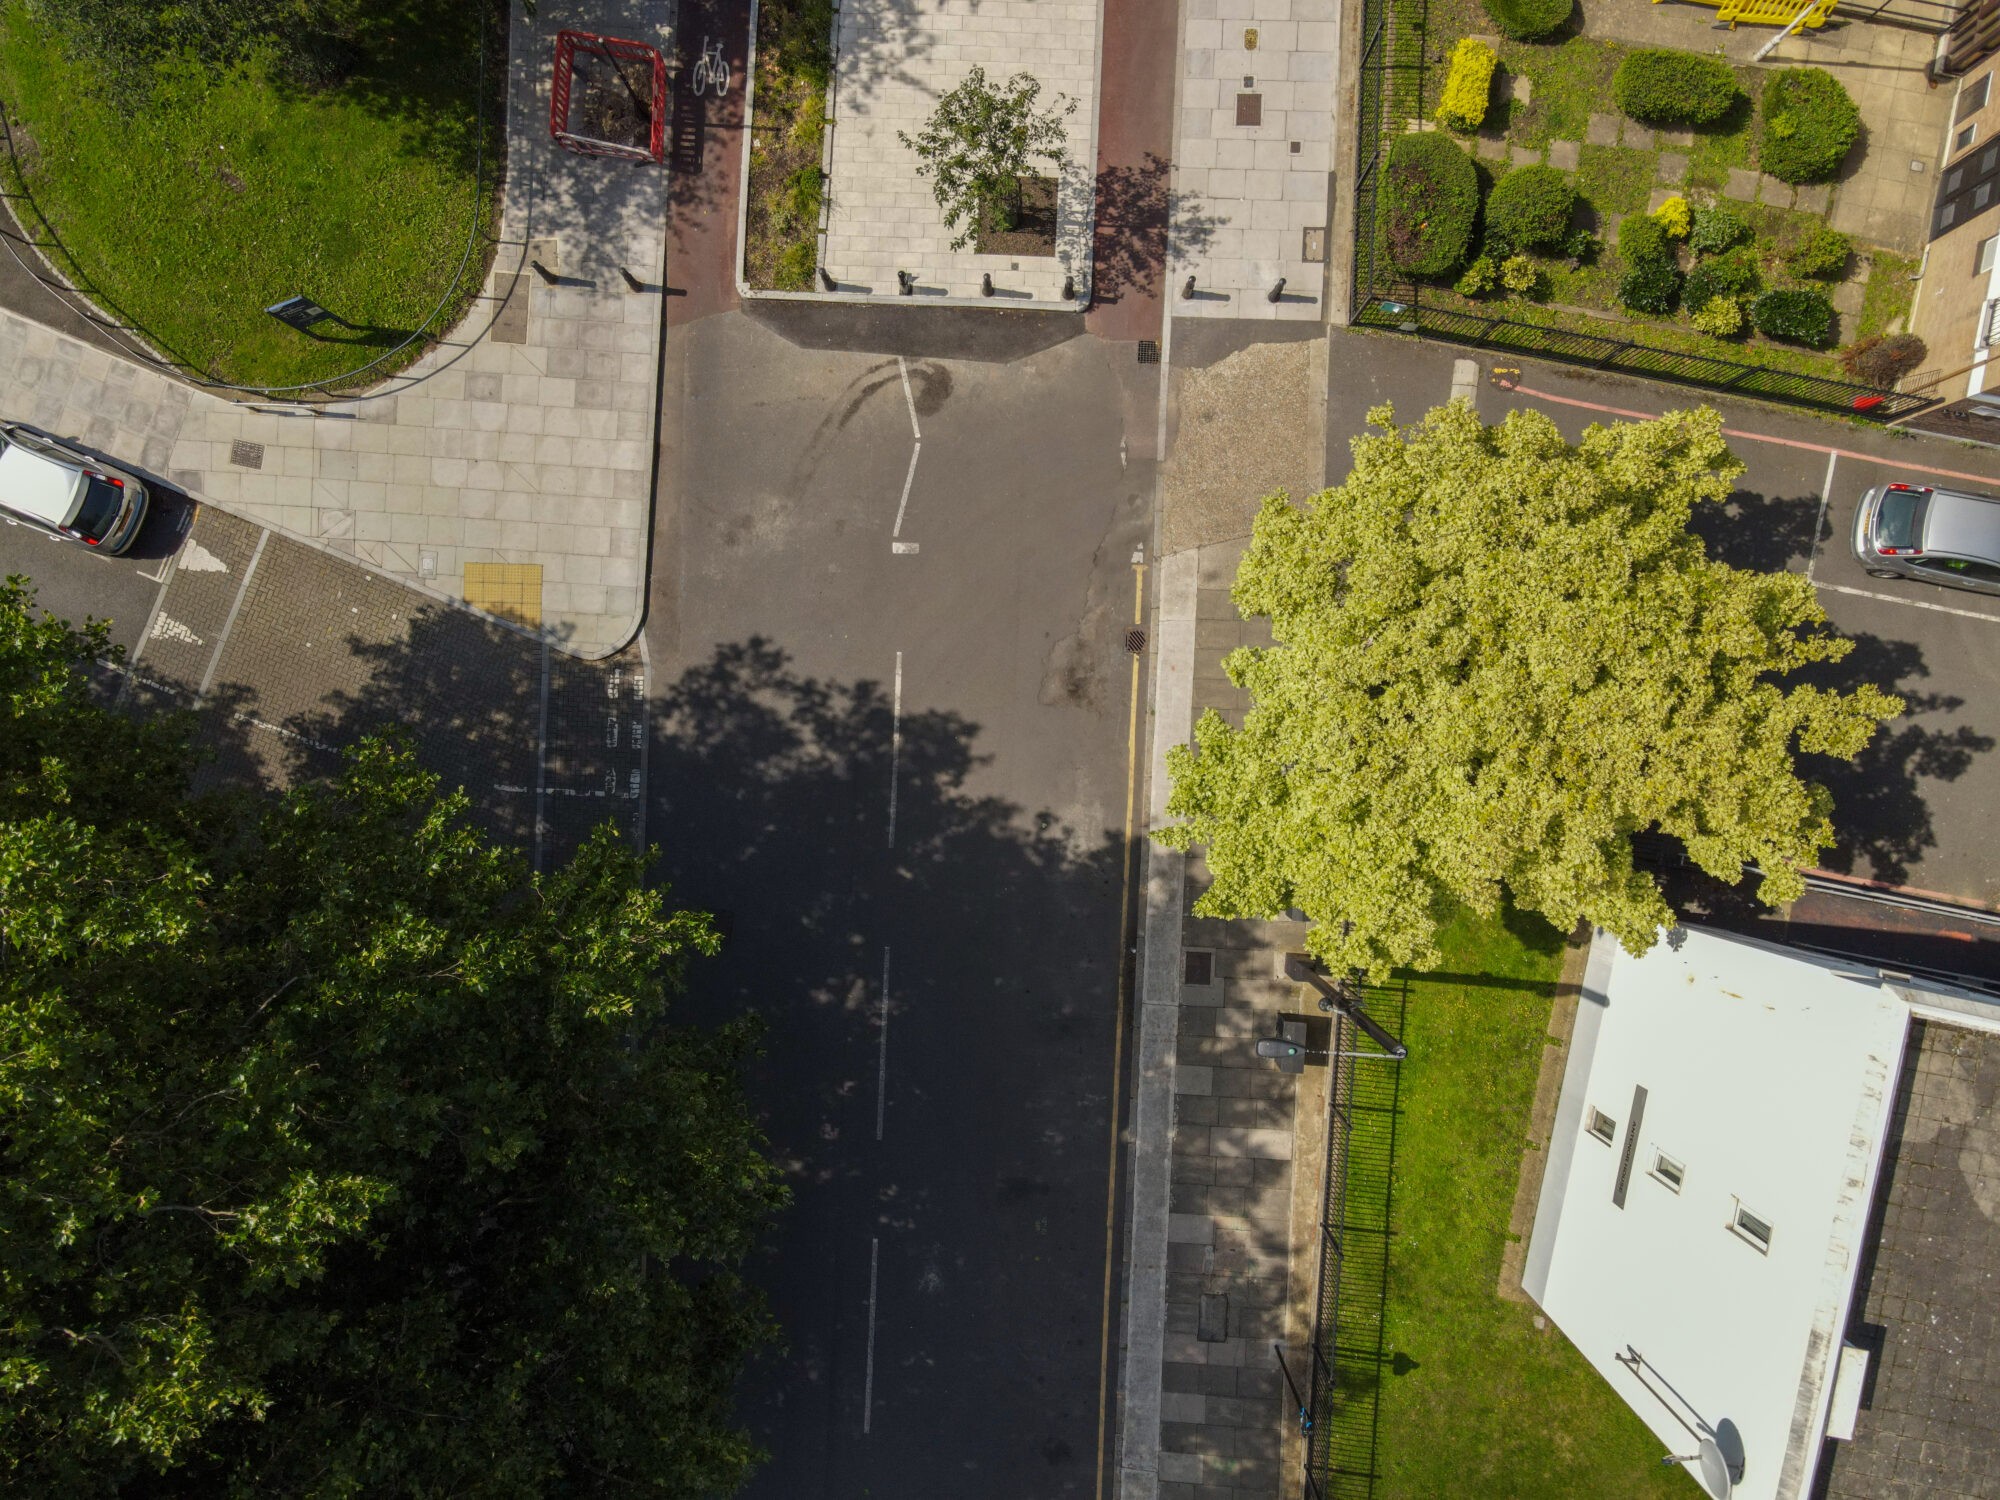 London Drone Photography - Chelmsford Essex Drone Photographers  14